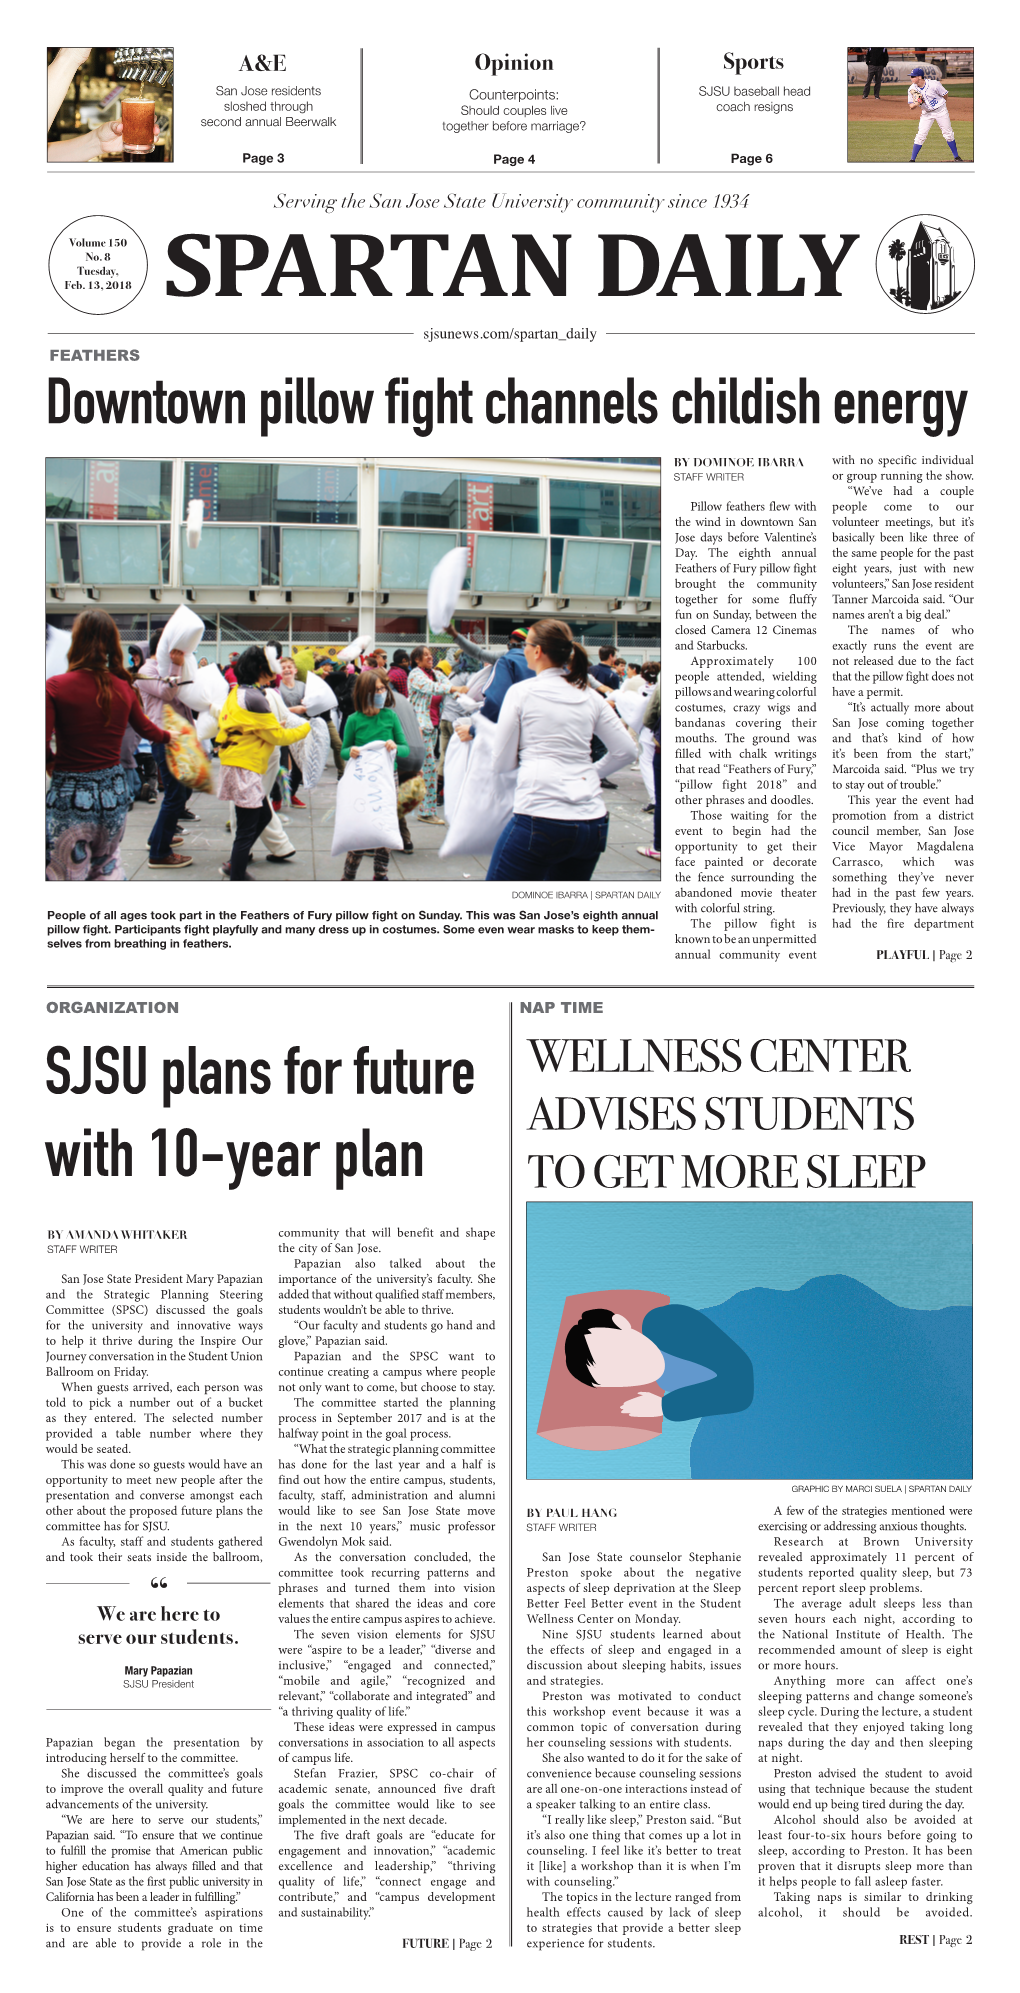 SJSU Plans for Future with 10-Year Plan